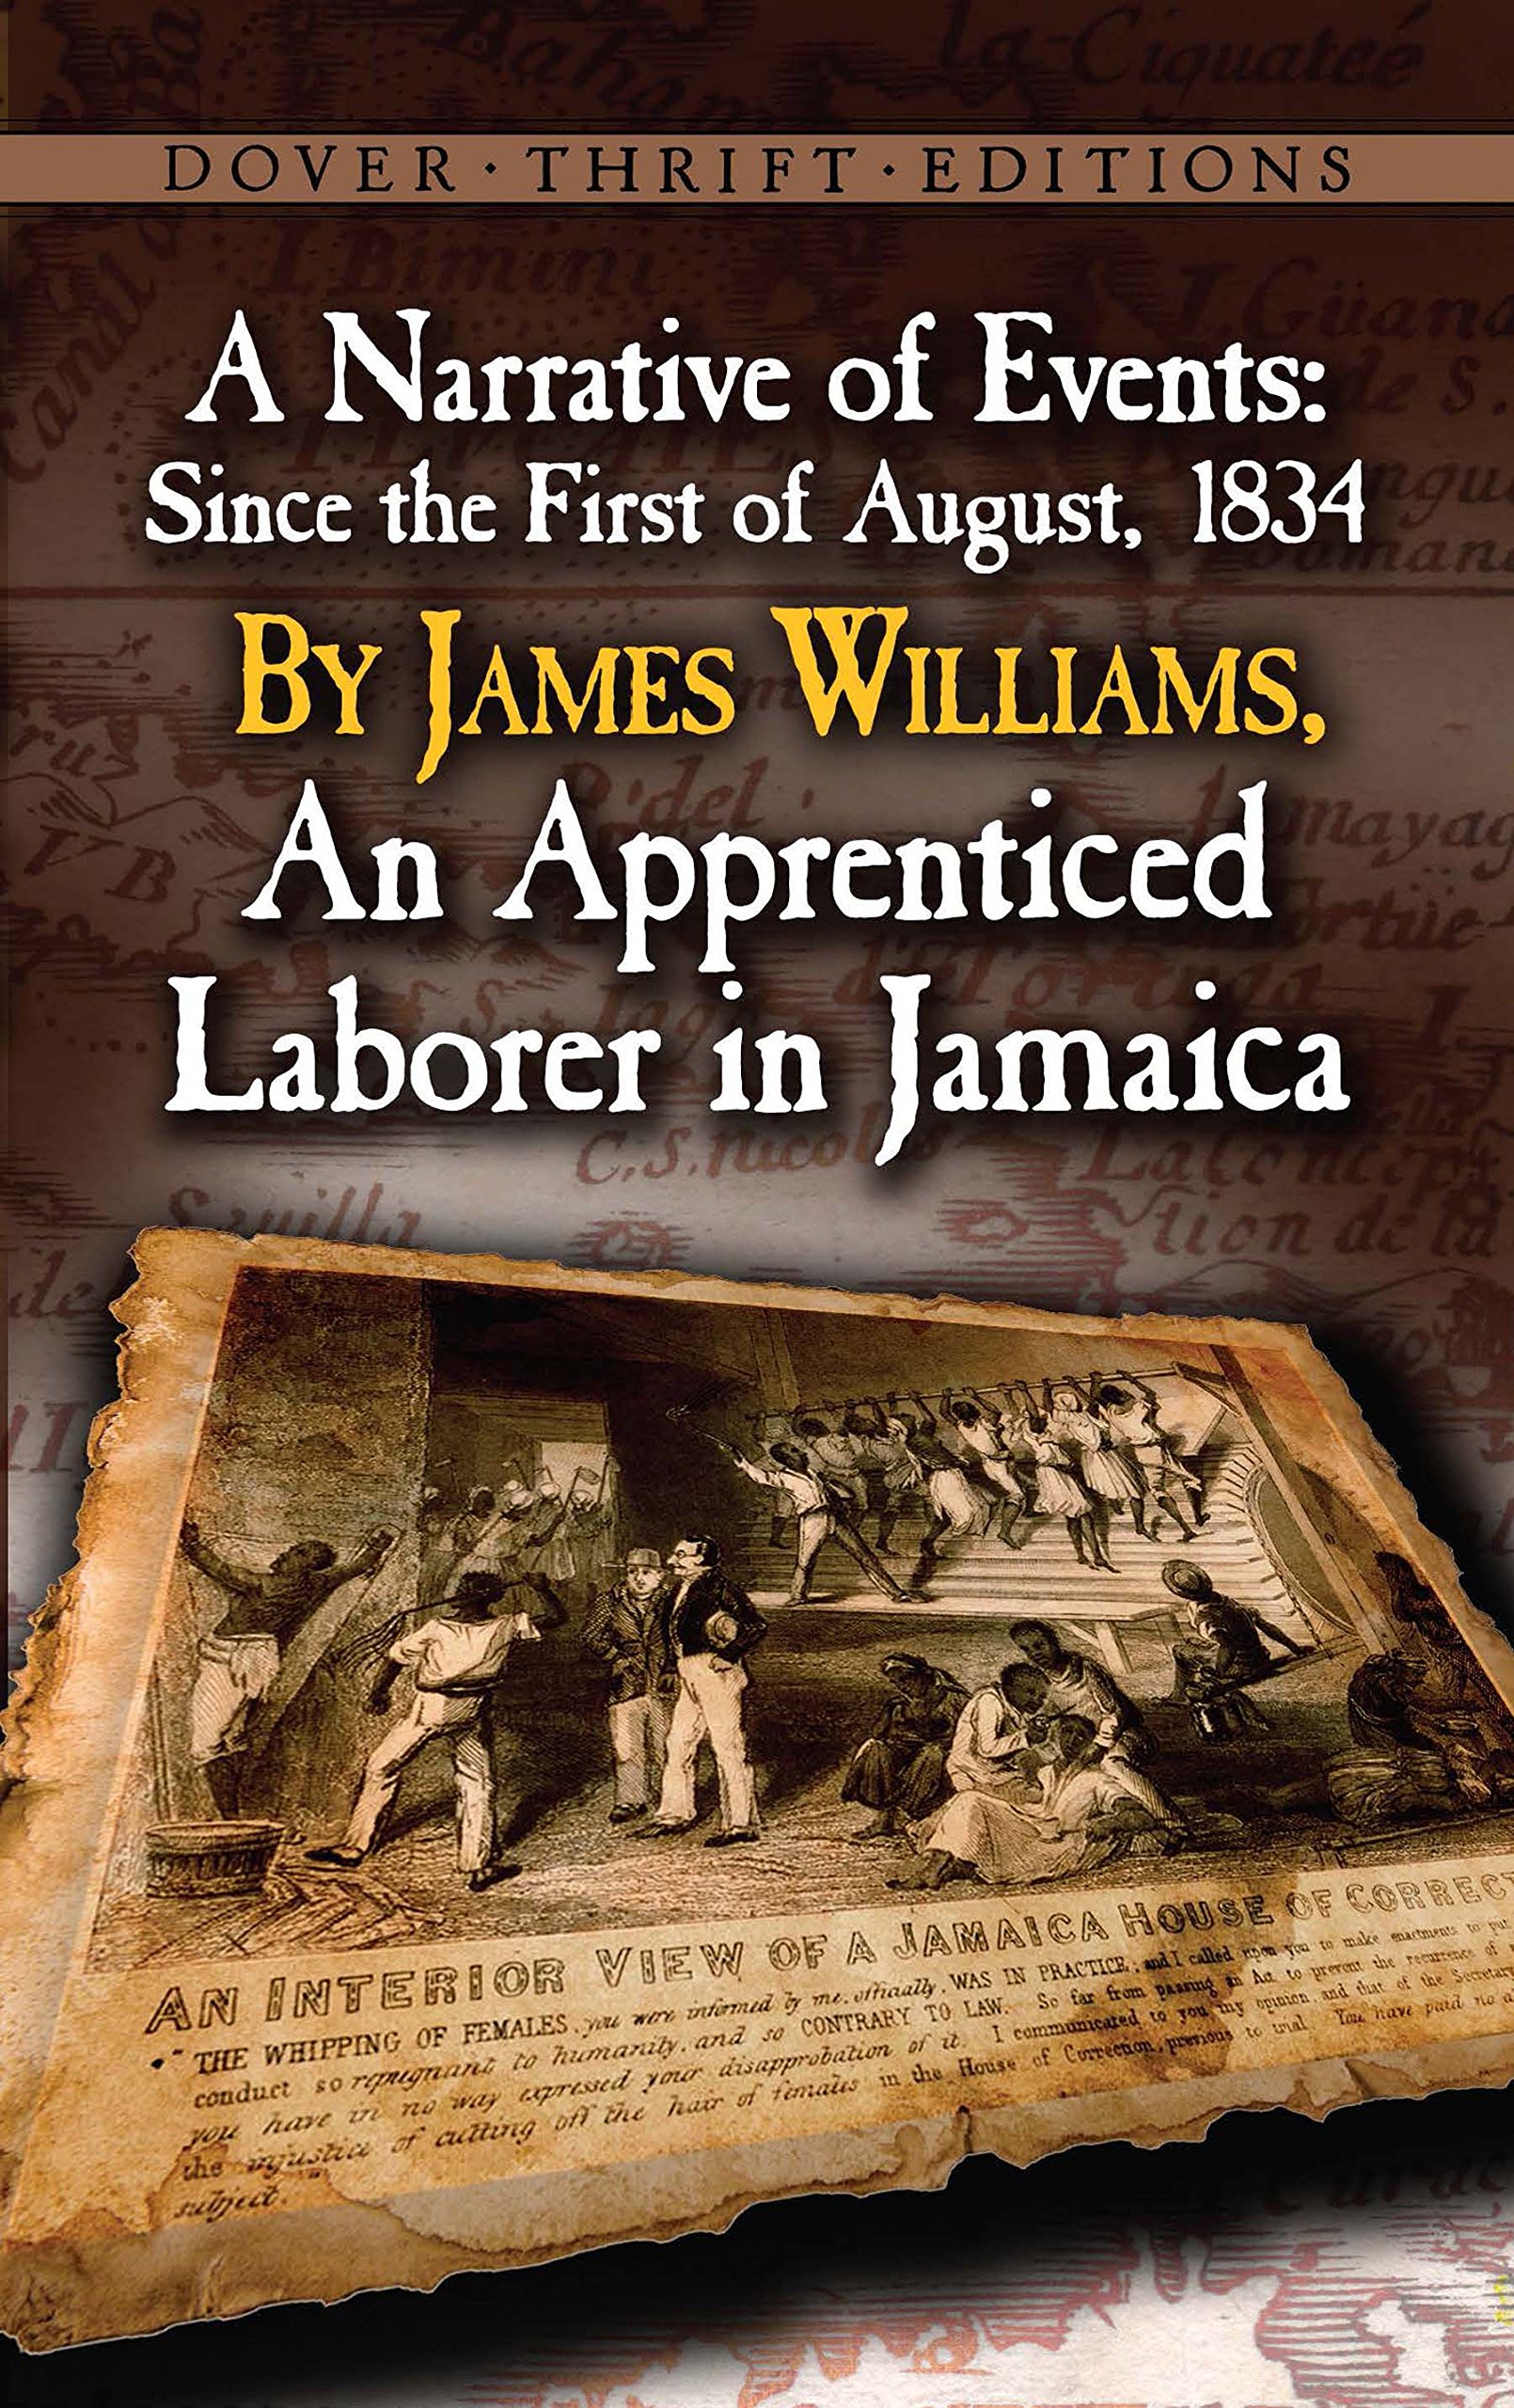 A Narrative of Events: Since the First of August, 1834, by James Williams, an Apprenticed Laborer in Jamaica (Dover Thrift Editions: Black History)